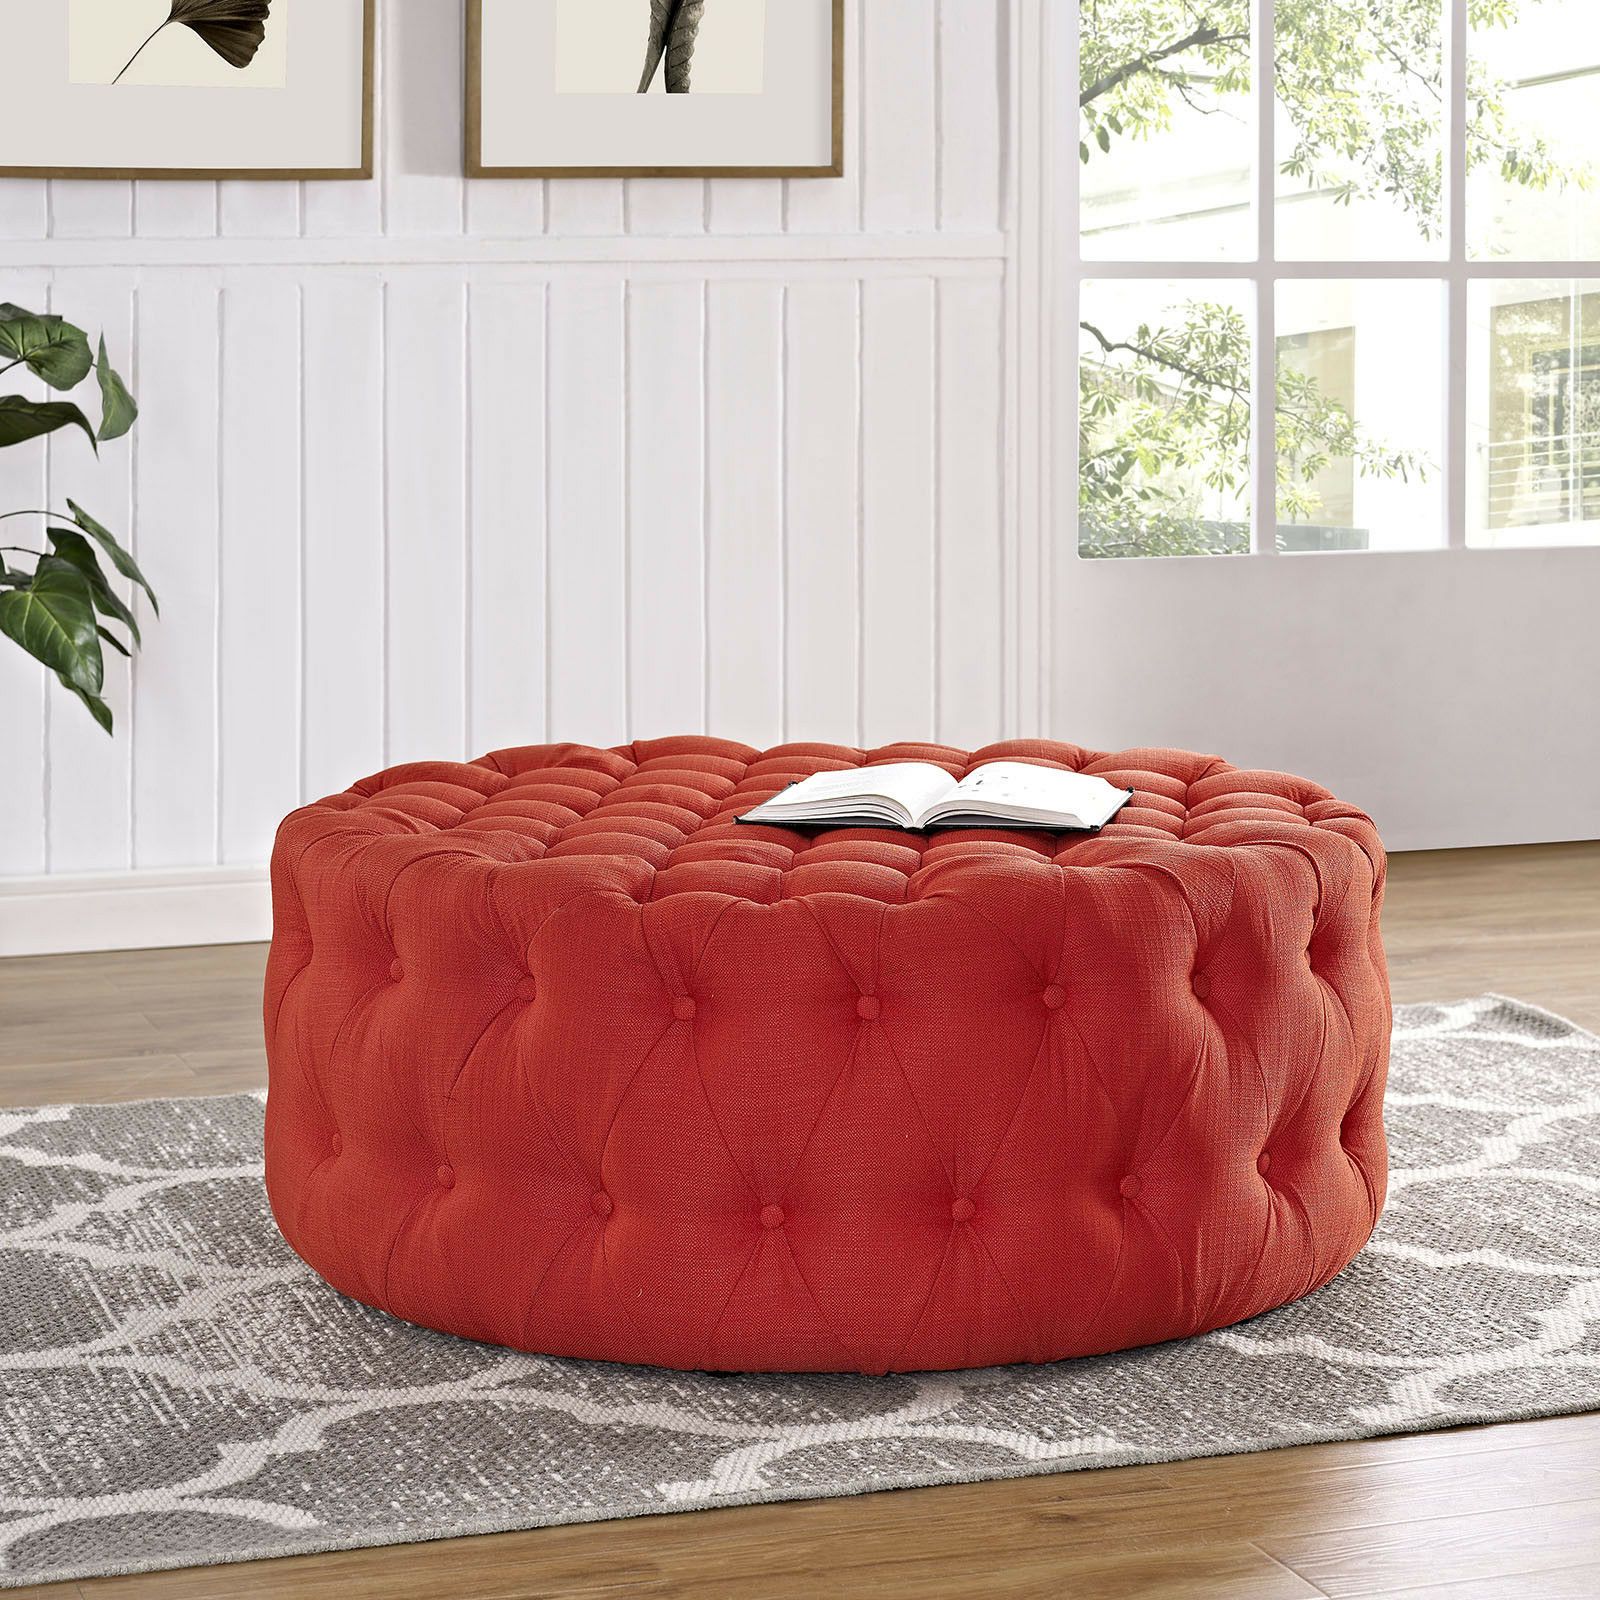 Round Black Tasseled Ottomans Intended For Preferred Button Tufted Fabric Upholstered Round Ottoman In Atomic Red (View 4 of 10)